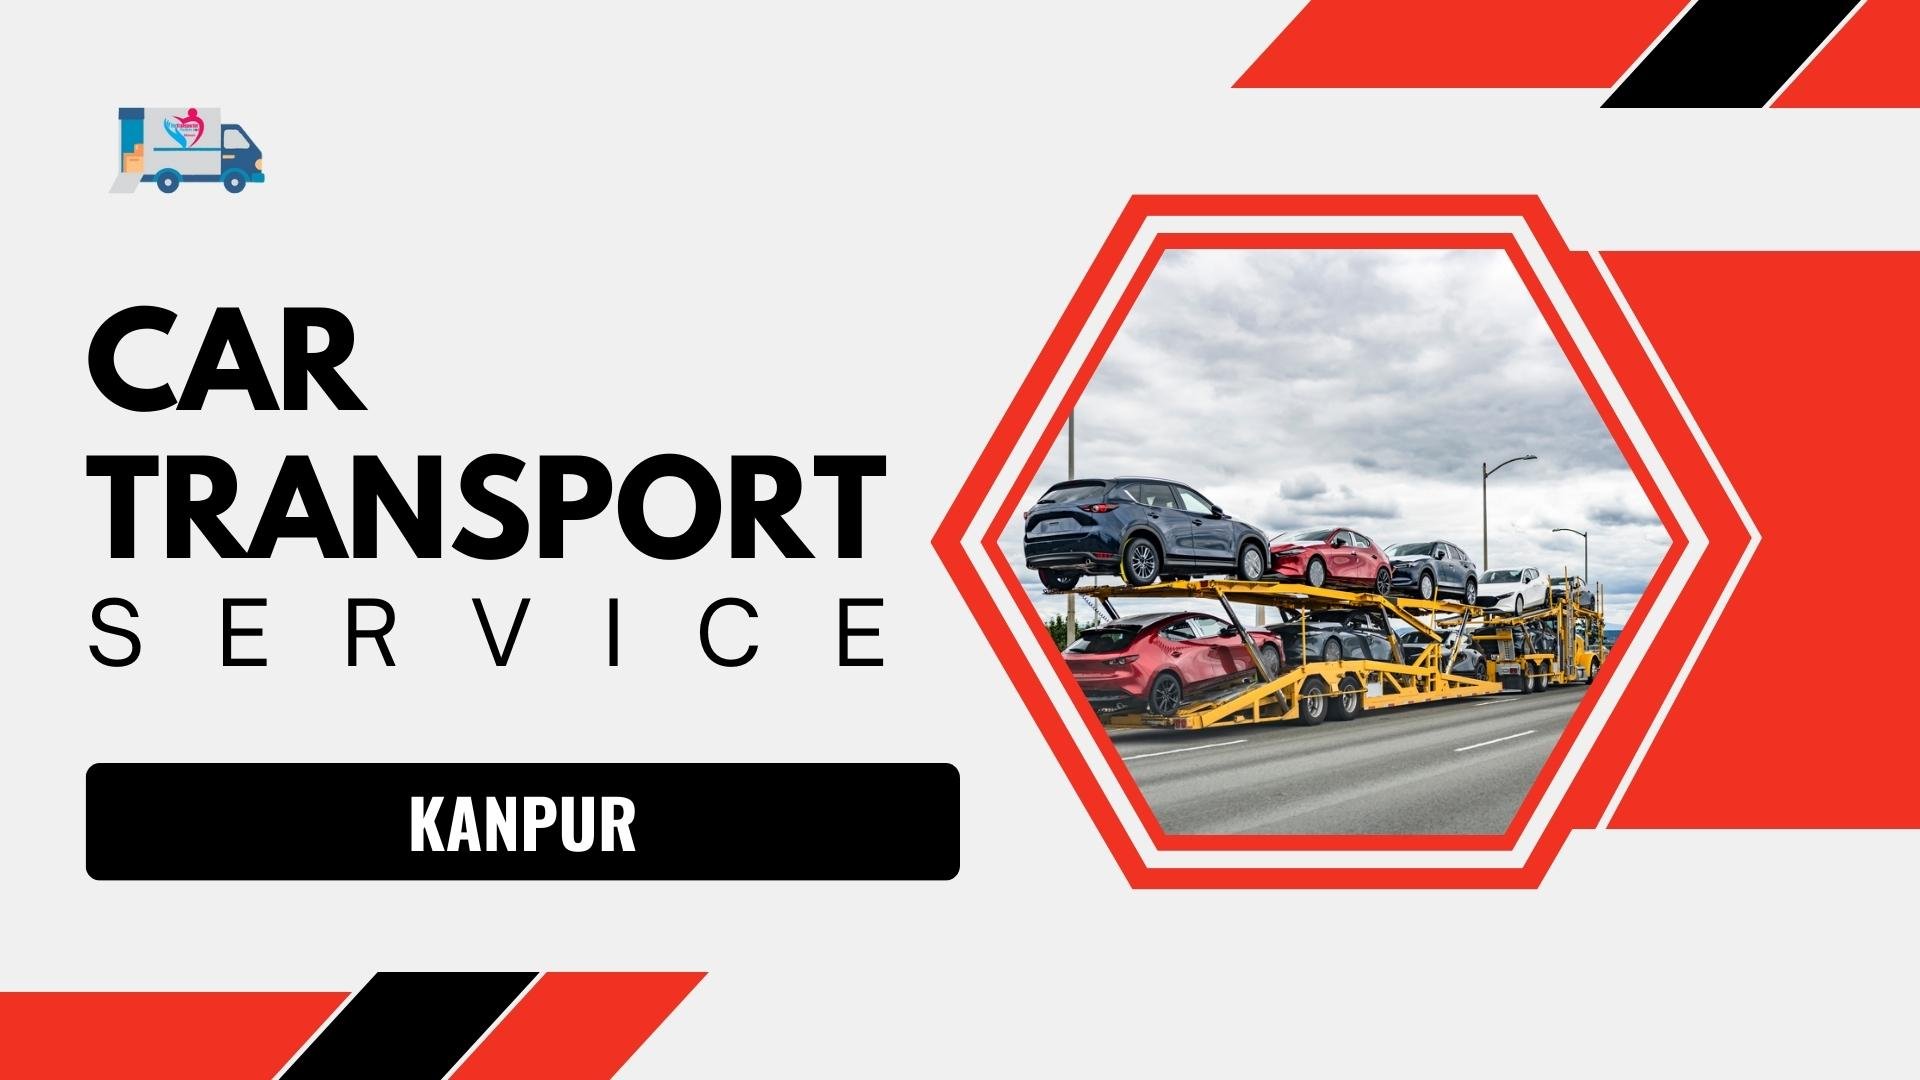 Quality car Carrier Service in Kanpur